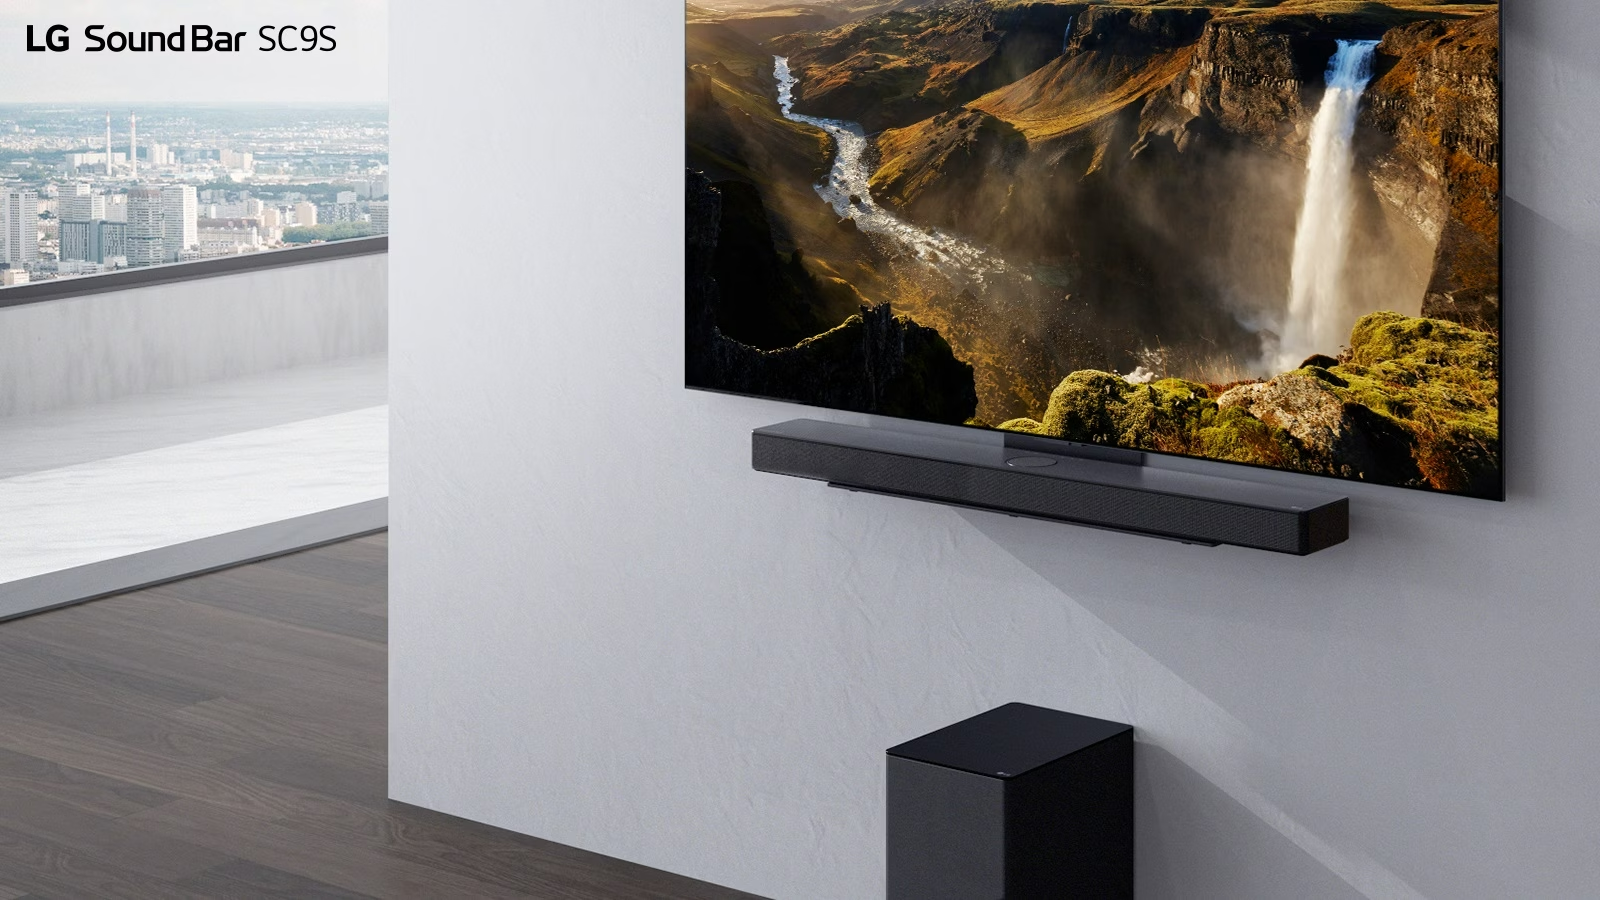 TV and LG Soundbar  SC9S are hung on a white wall. Below a black wireless subwoofer is placed on the floor. Beyond the window on the left a city view with the blue sky can be found.